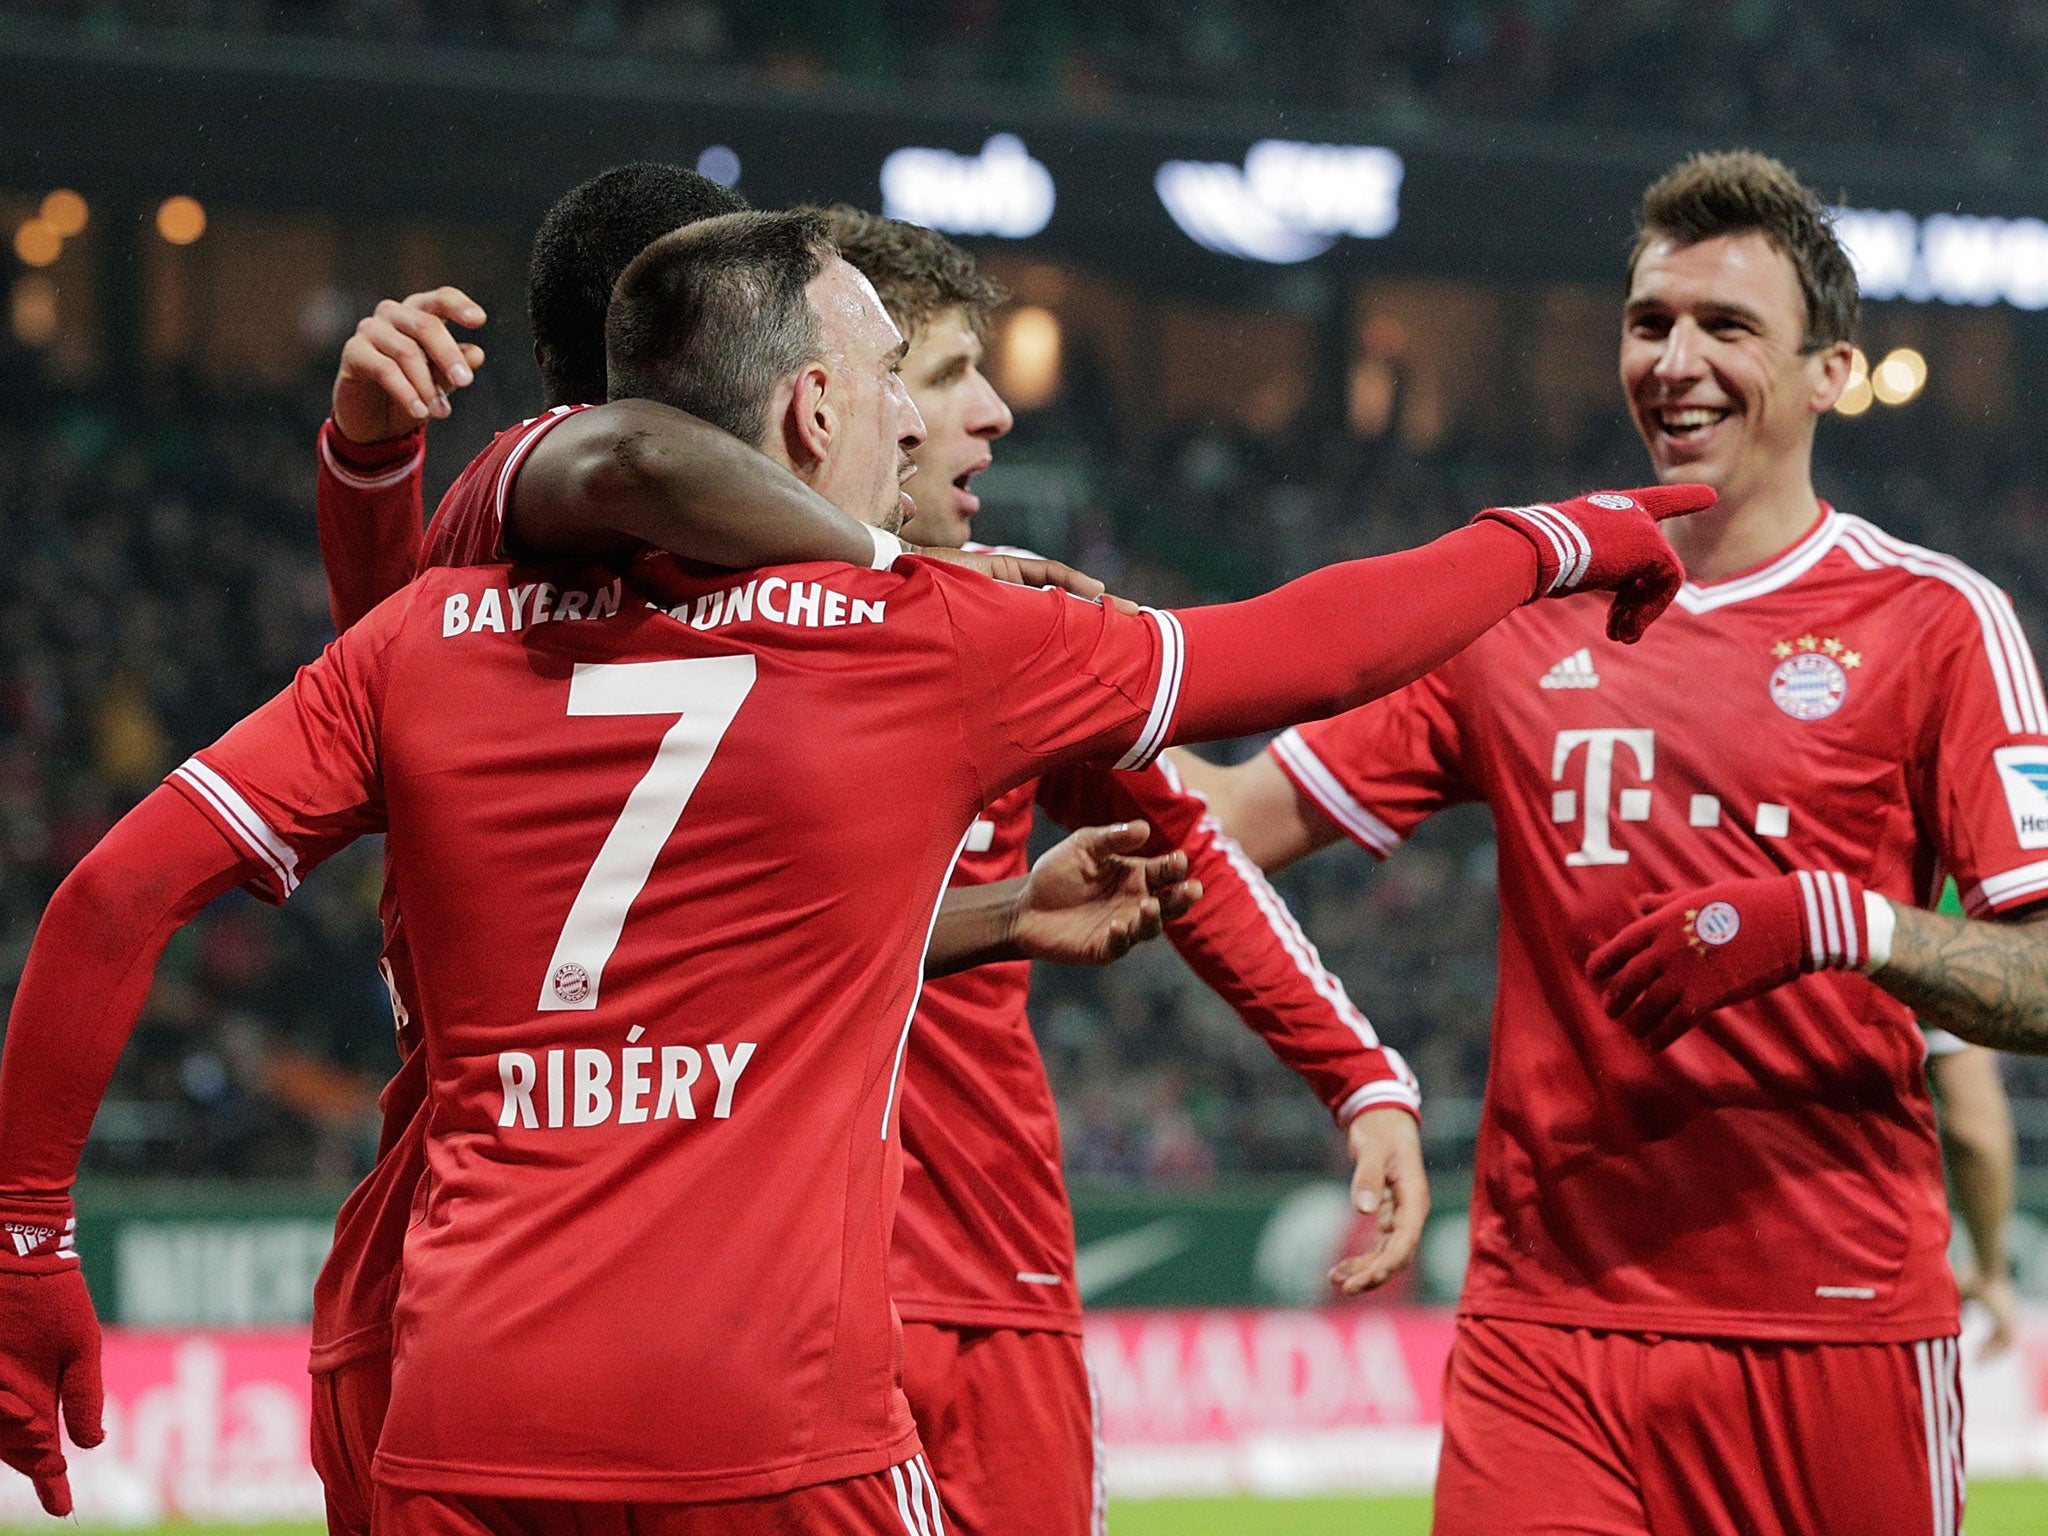 Bayern Munich winger Franck Ribery is congratulated by team-mates after scoring during the Bundesliga match against Werder Bremen on Saturday